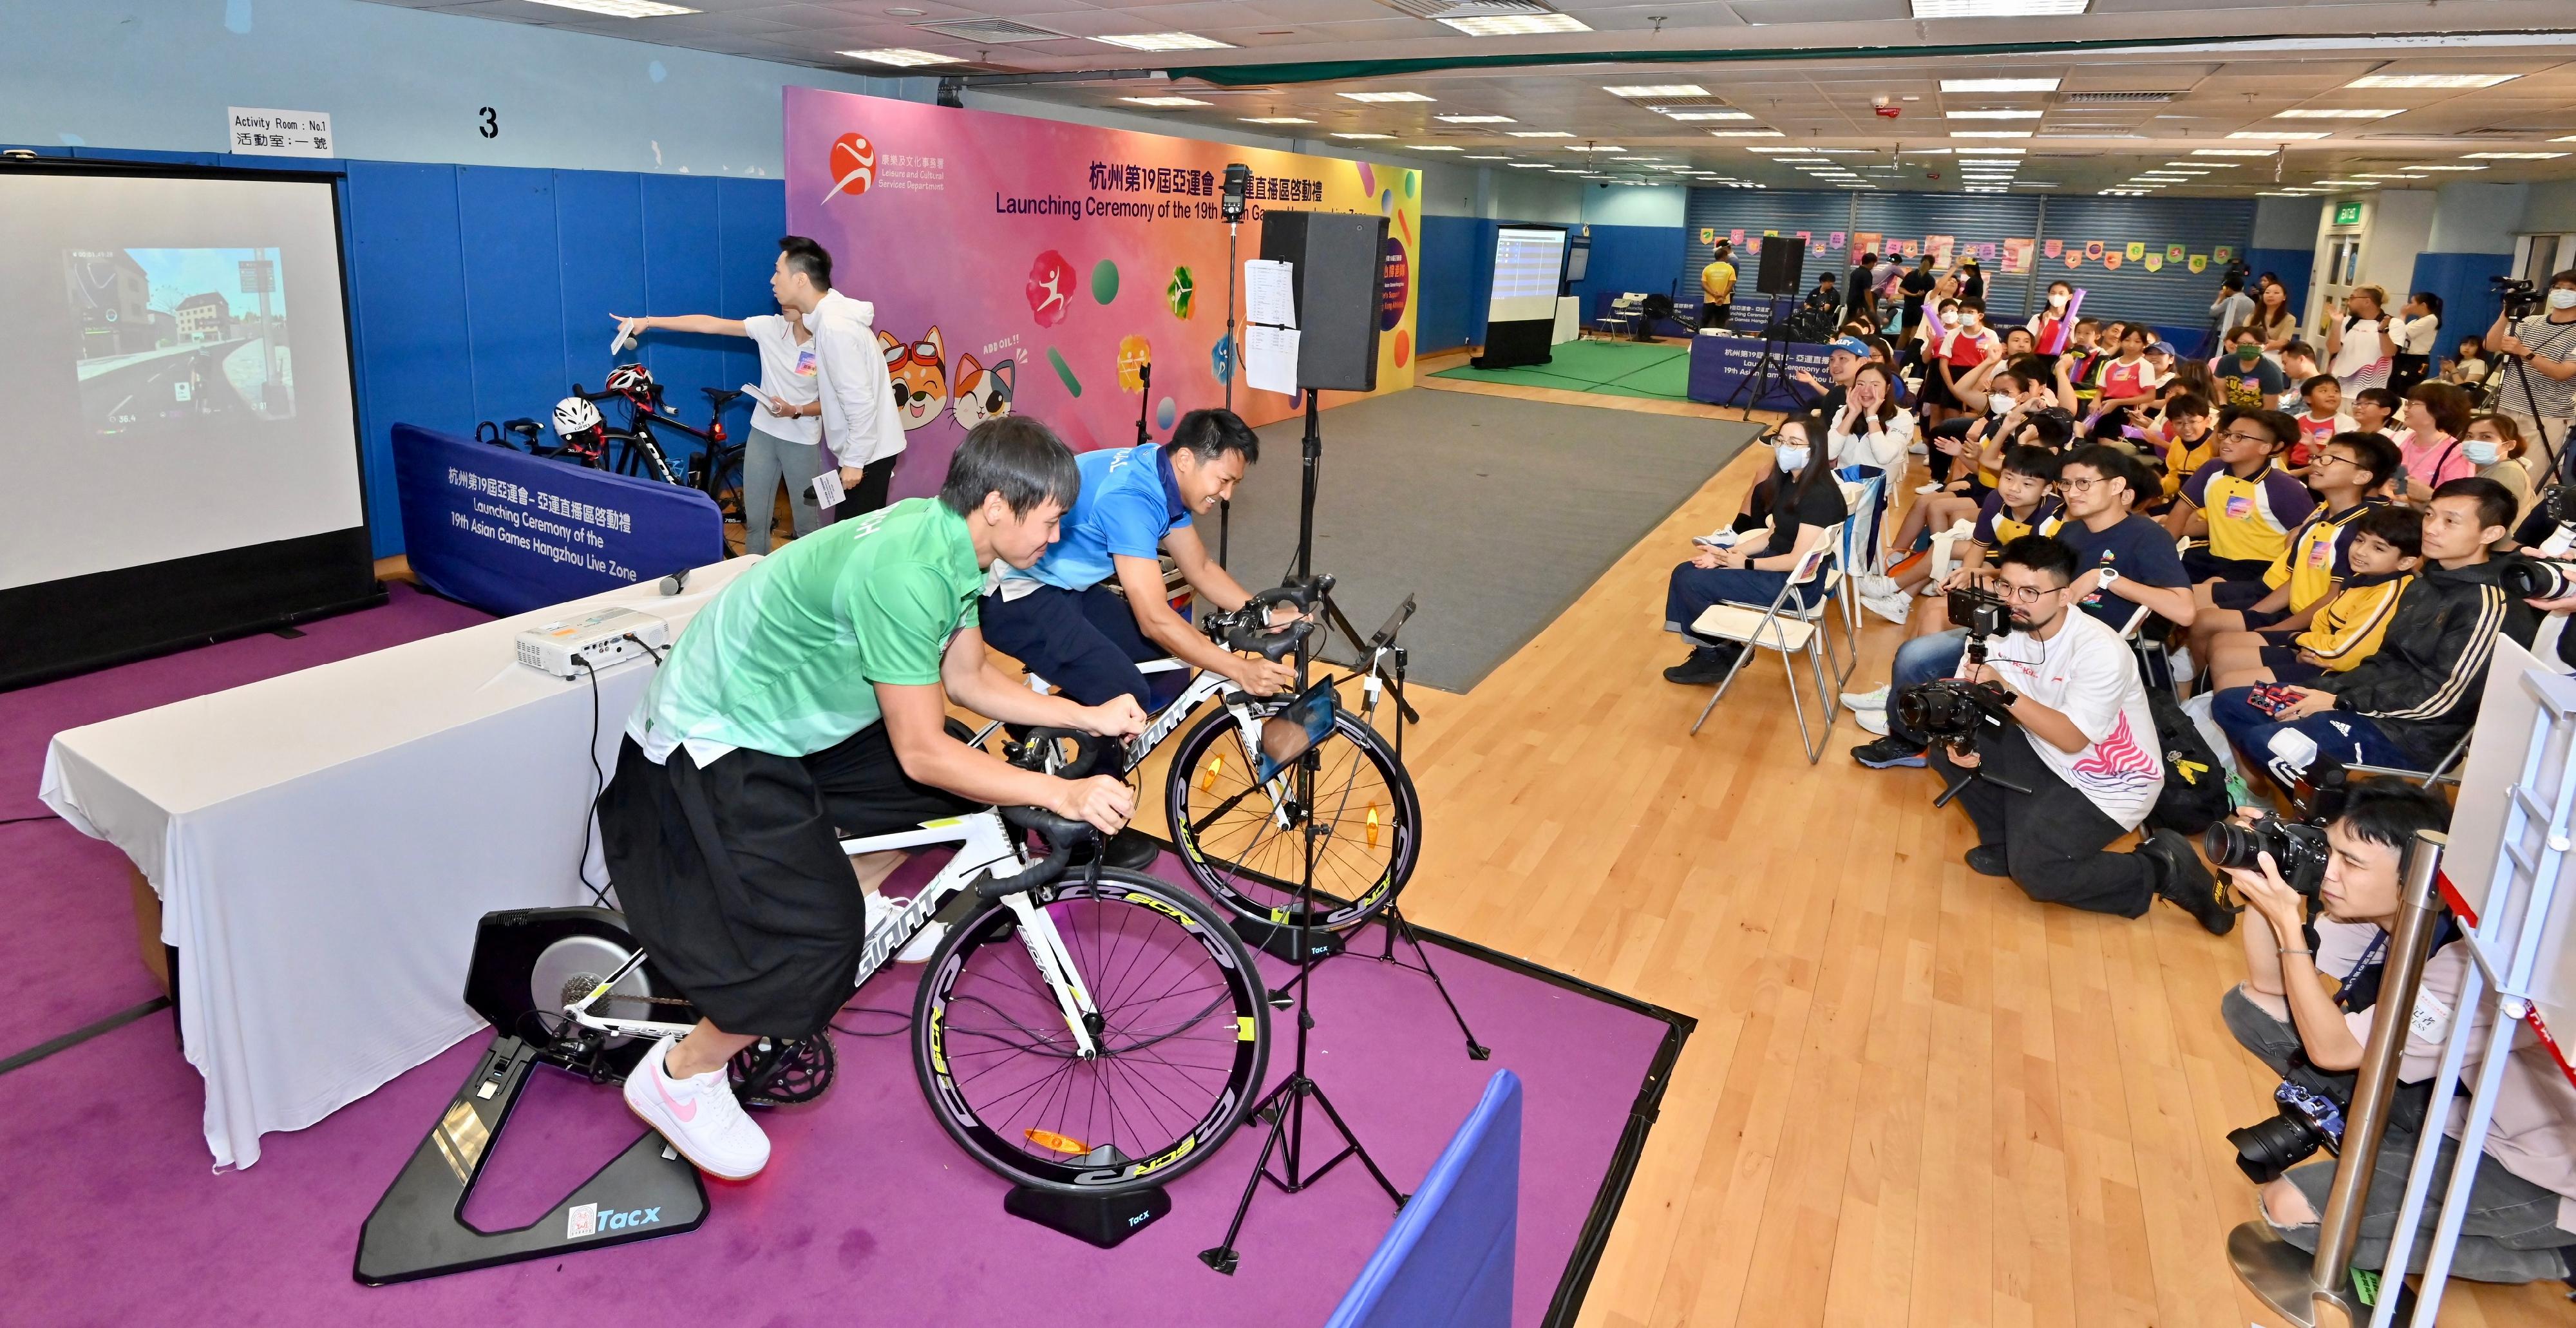 The Leisure and Cultural Services Department held the "Launching Ceremony of the 19th Asian Games Hangzhou Live Zone" at the Secondary Hall of the Kowloon Park Sports Centre today (September 23). Photo shows former cycling athlete Leung Chi-yin (second left) and Chau Dor-ming (first left) demonstrating sports skills to the audience.